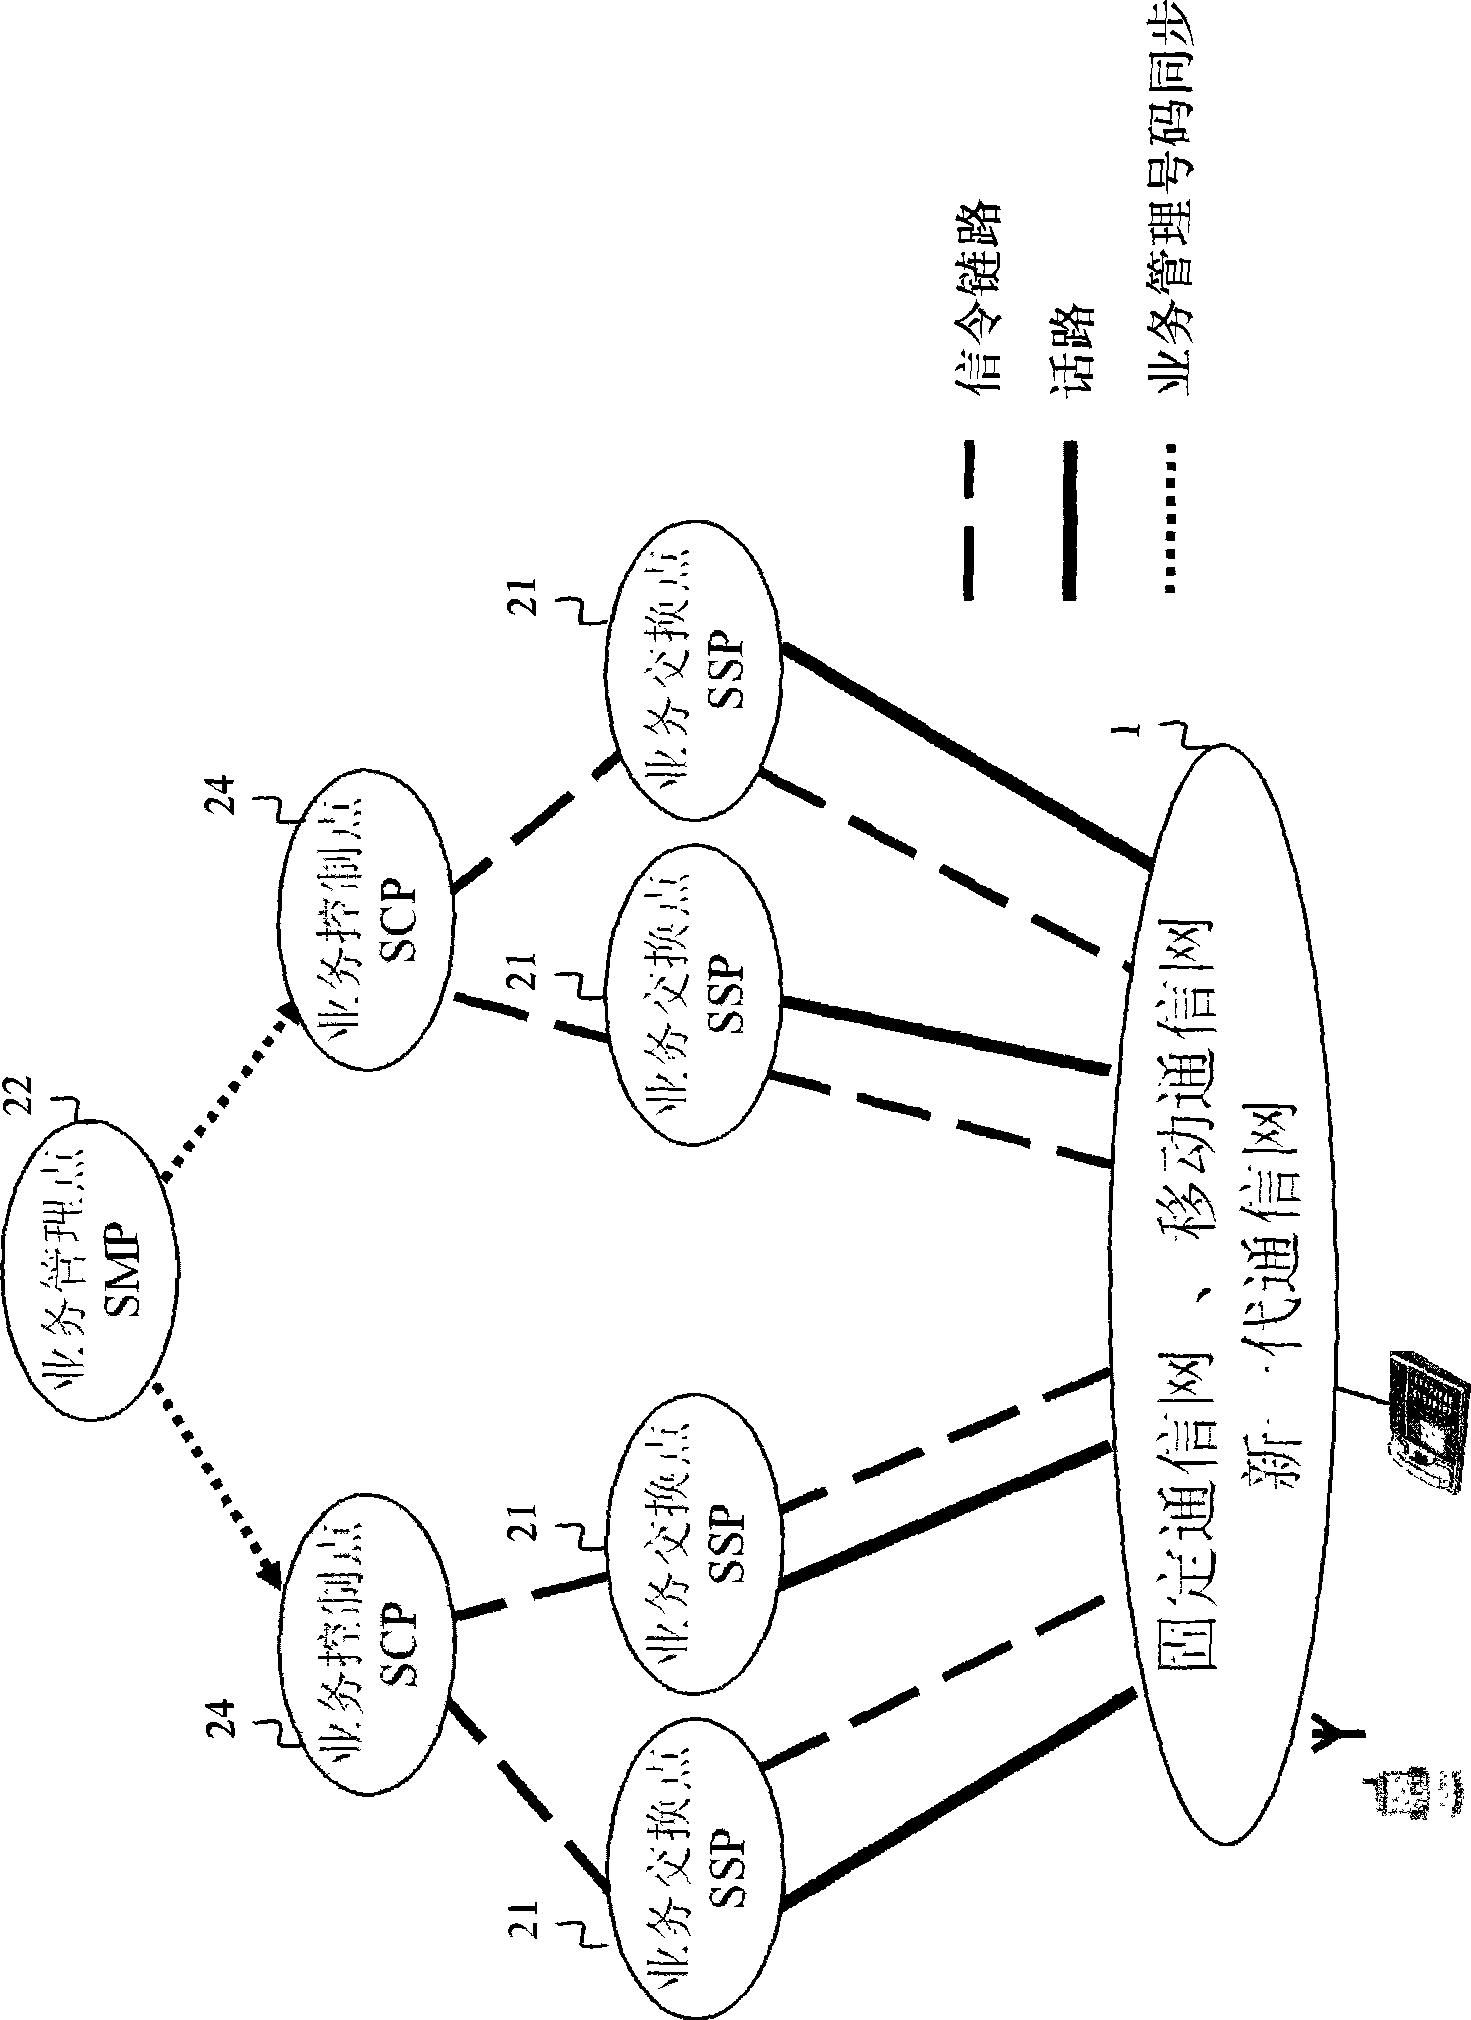 System for implementing prepositive logic personalized telecom value added business